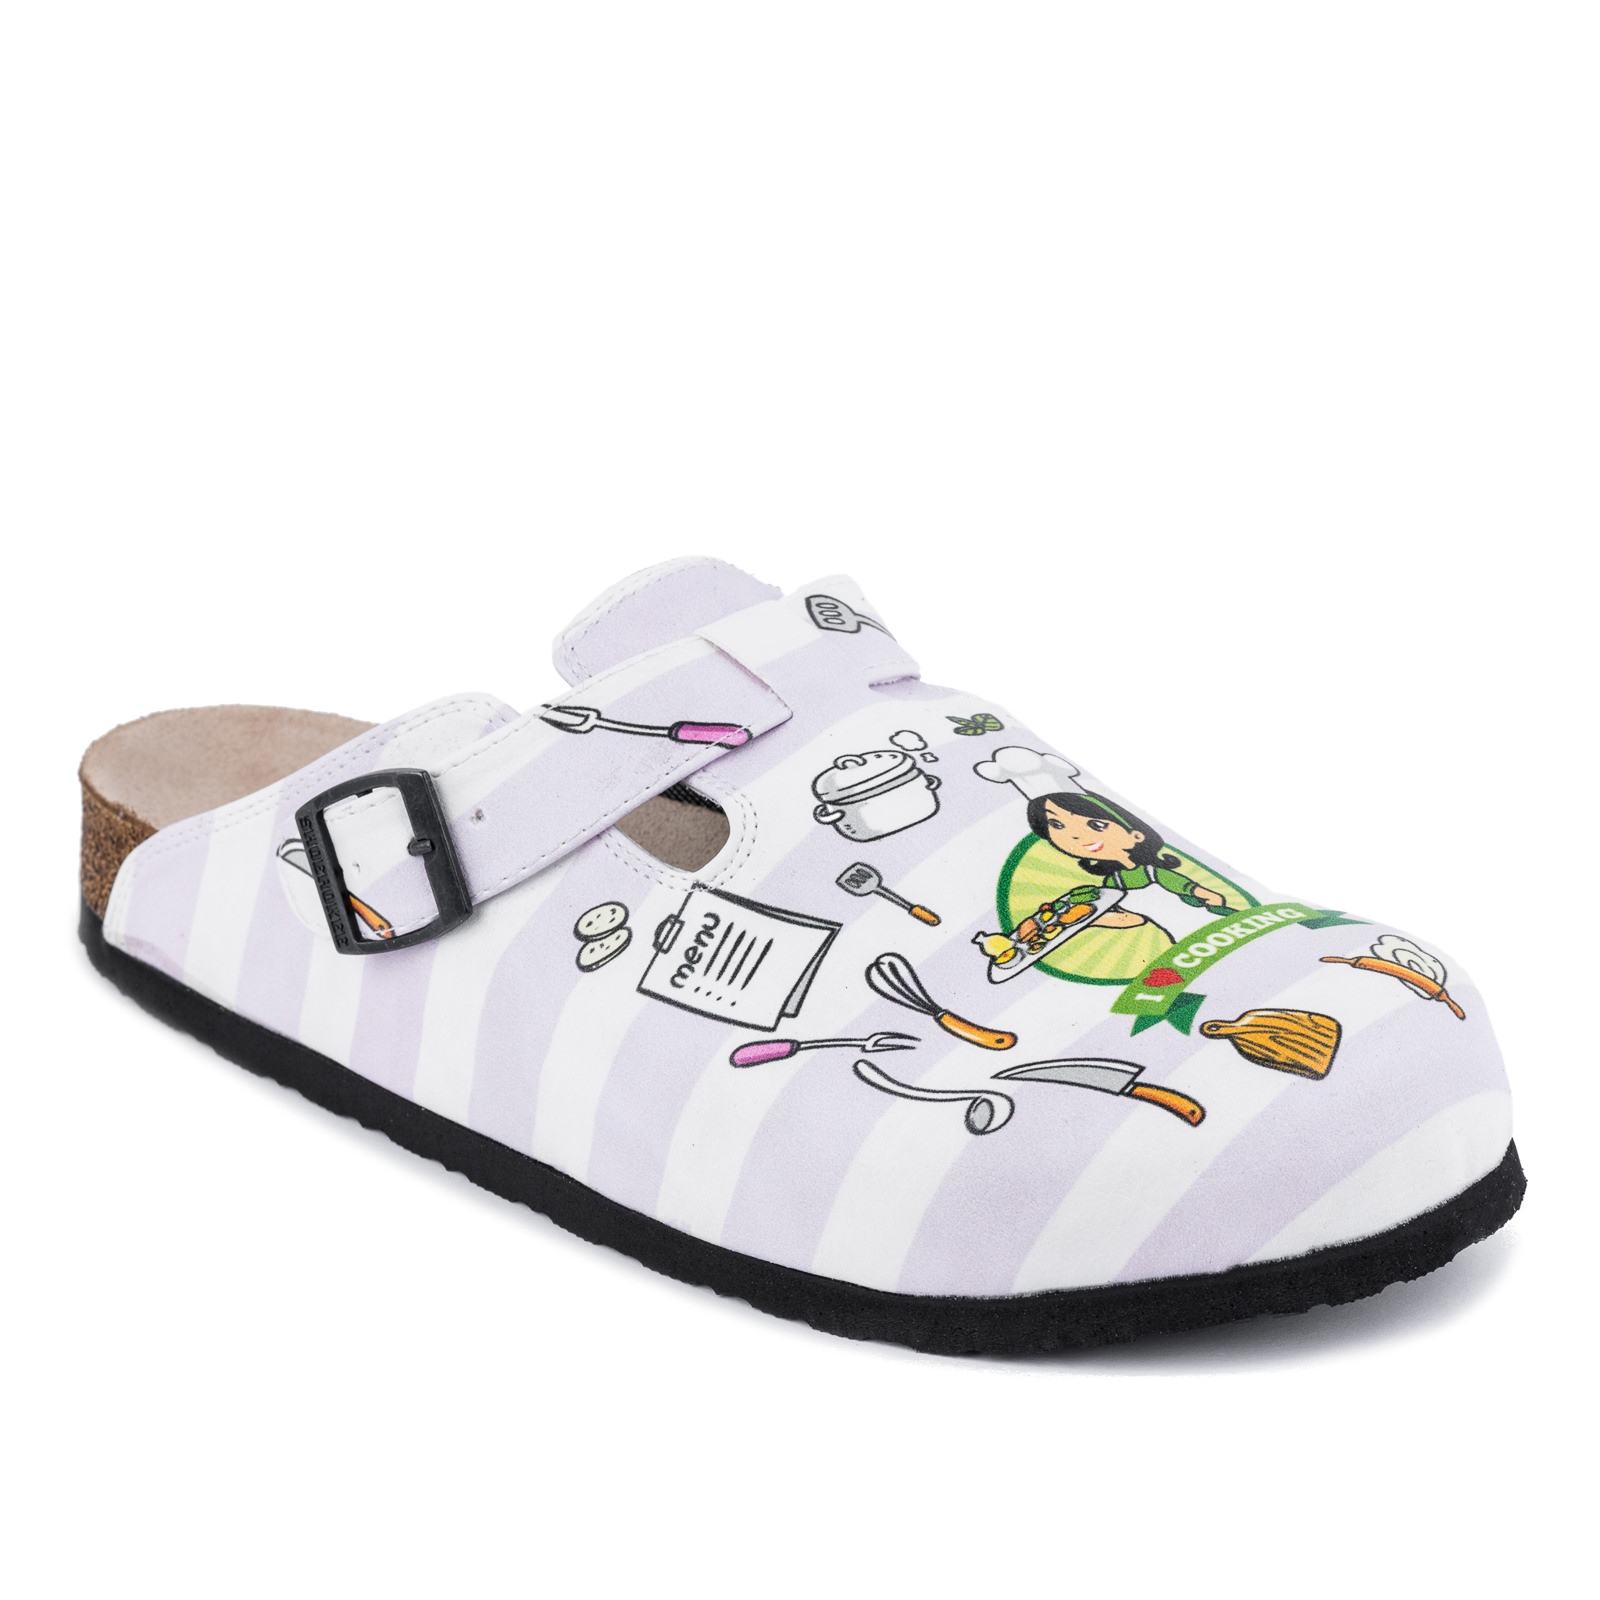 Patterned women clogs A061 - COOK - WHITE